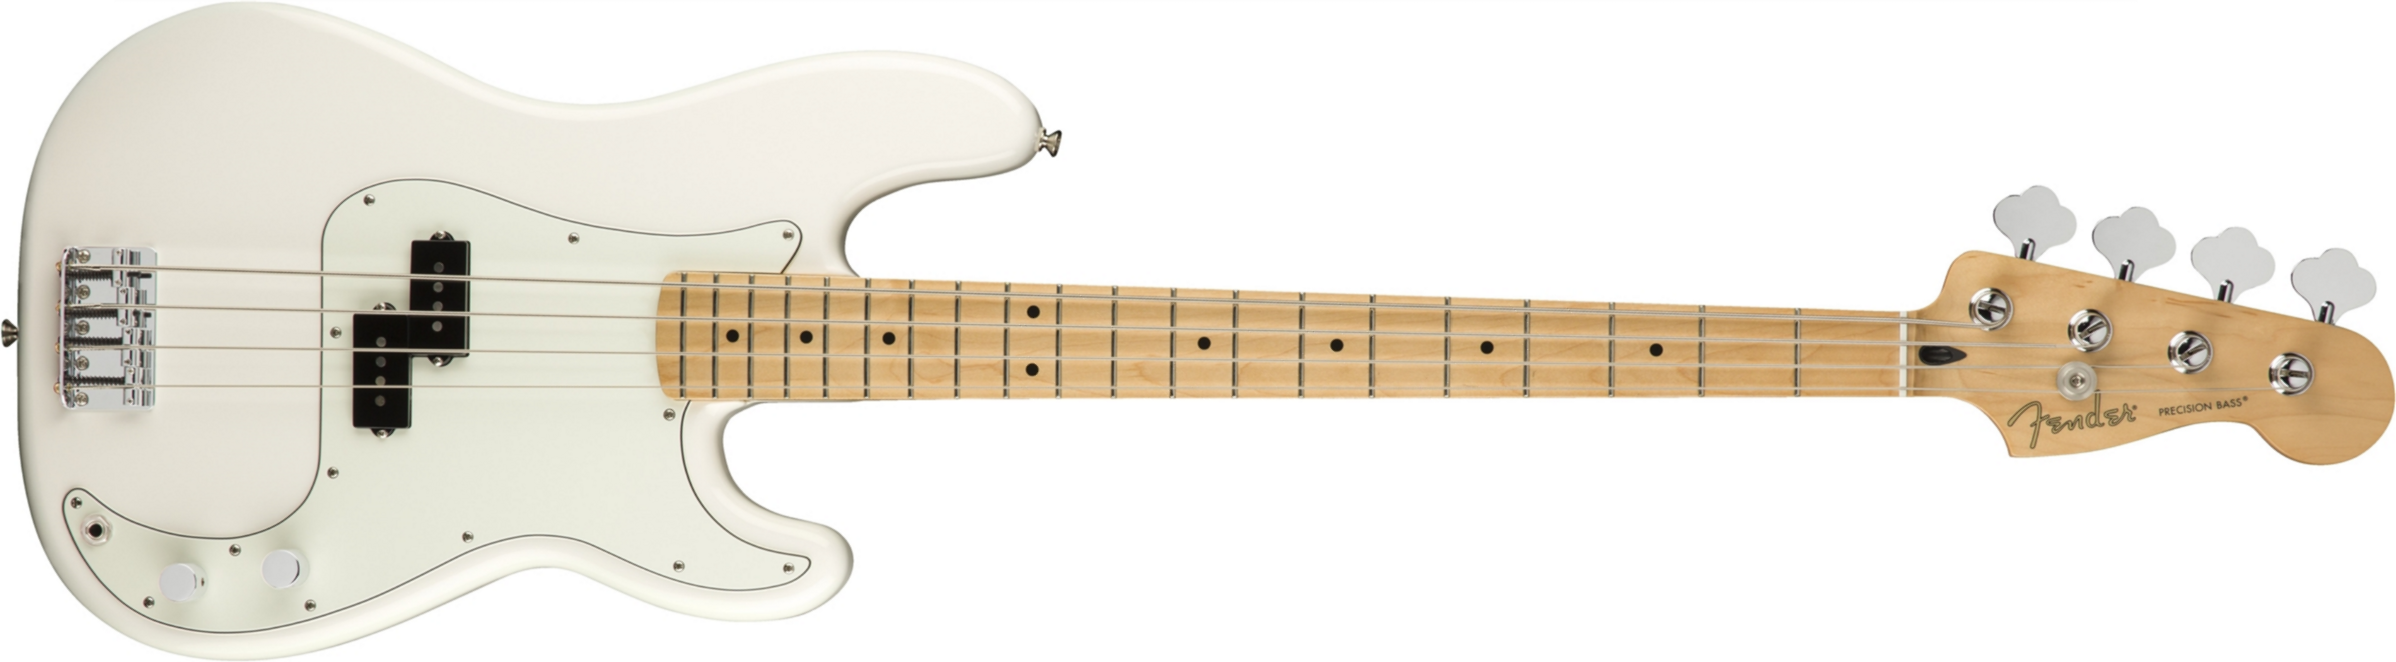 Fender Precision Bass Player Mex Mn - Polar White - Solid body electric bass - Main picture